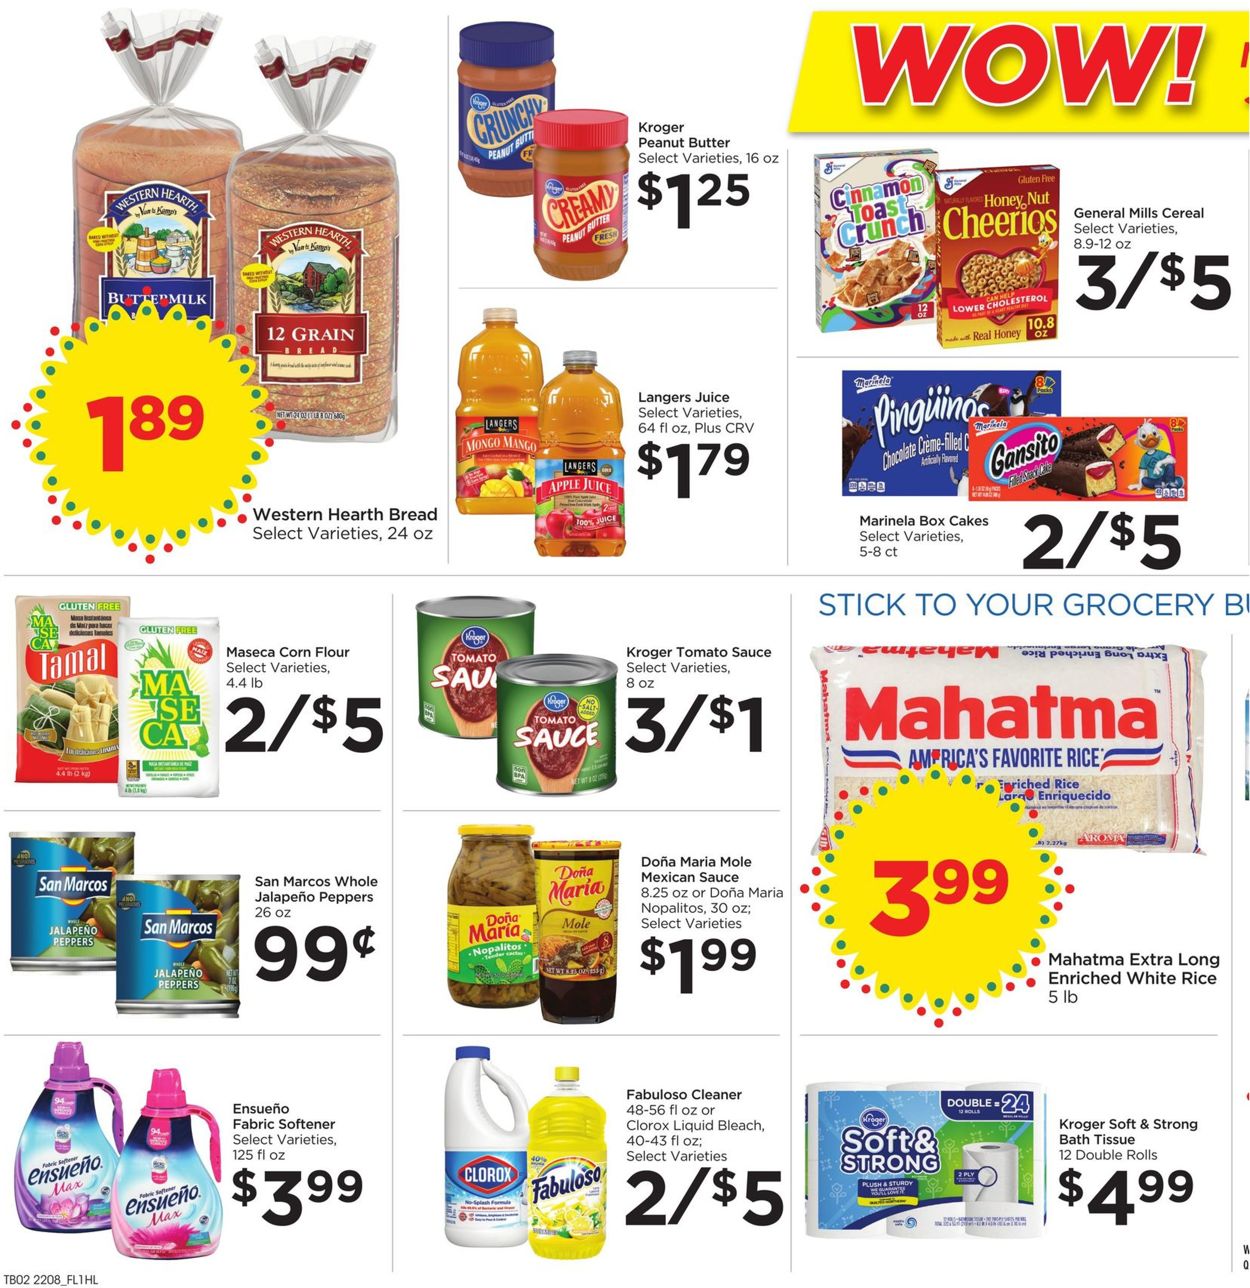 Food 4 Less Ad from 03/23/2022